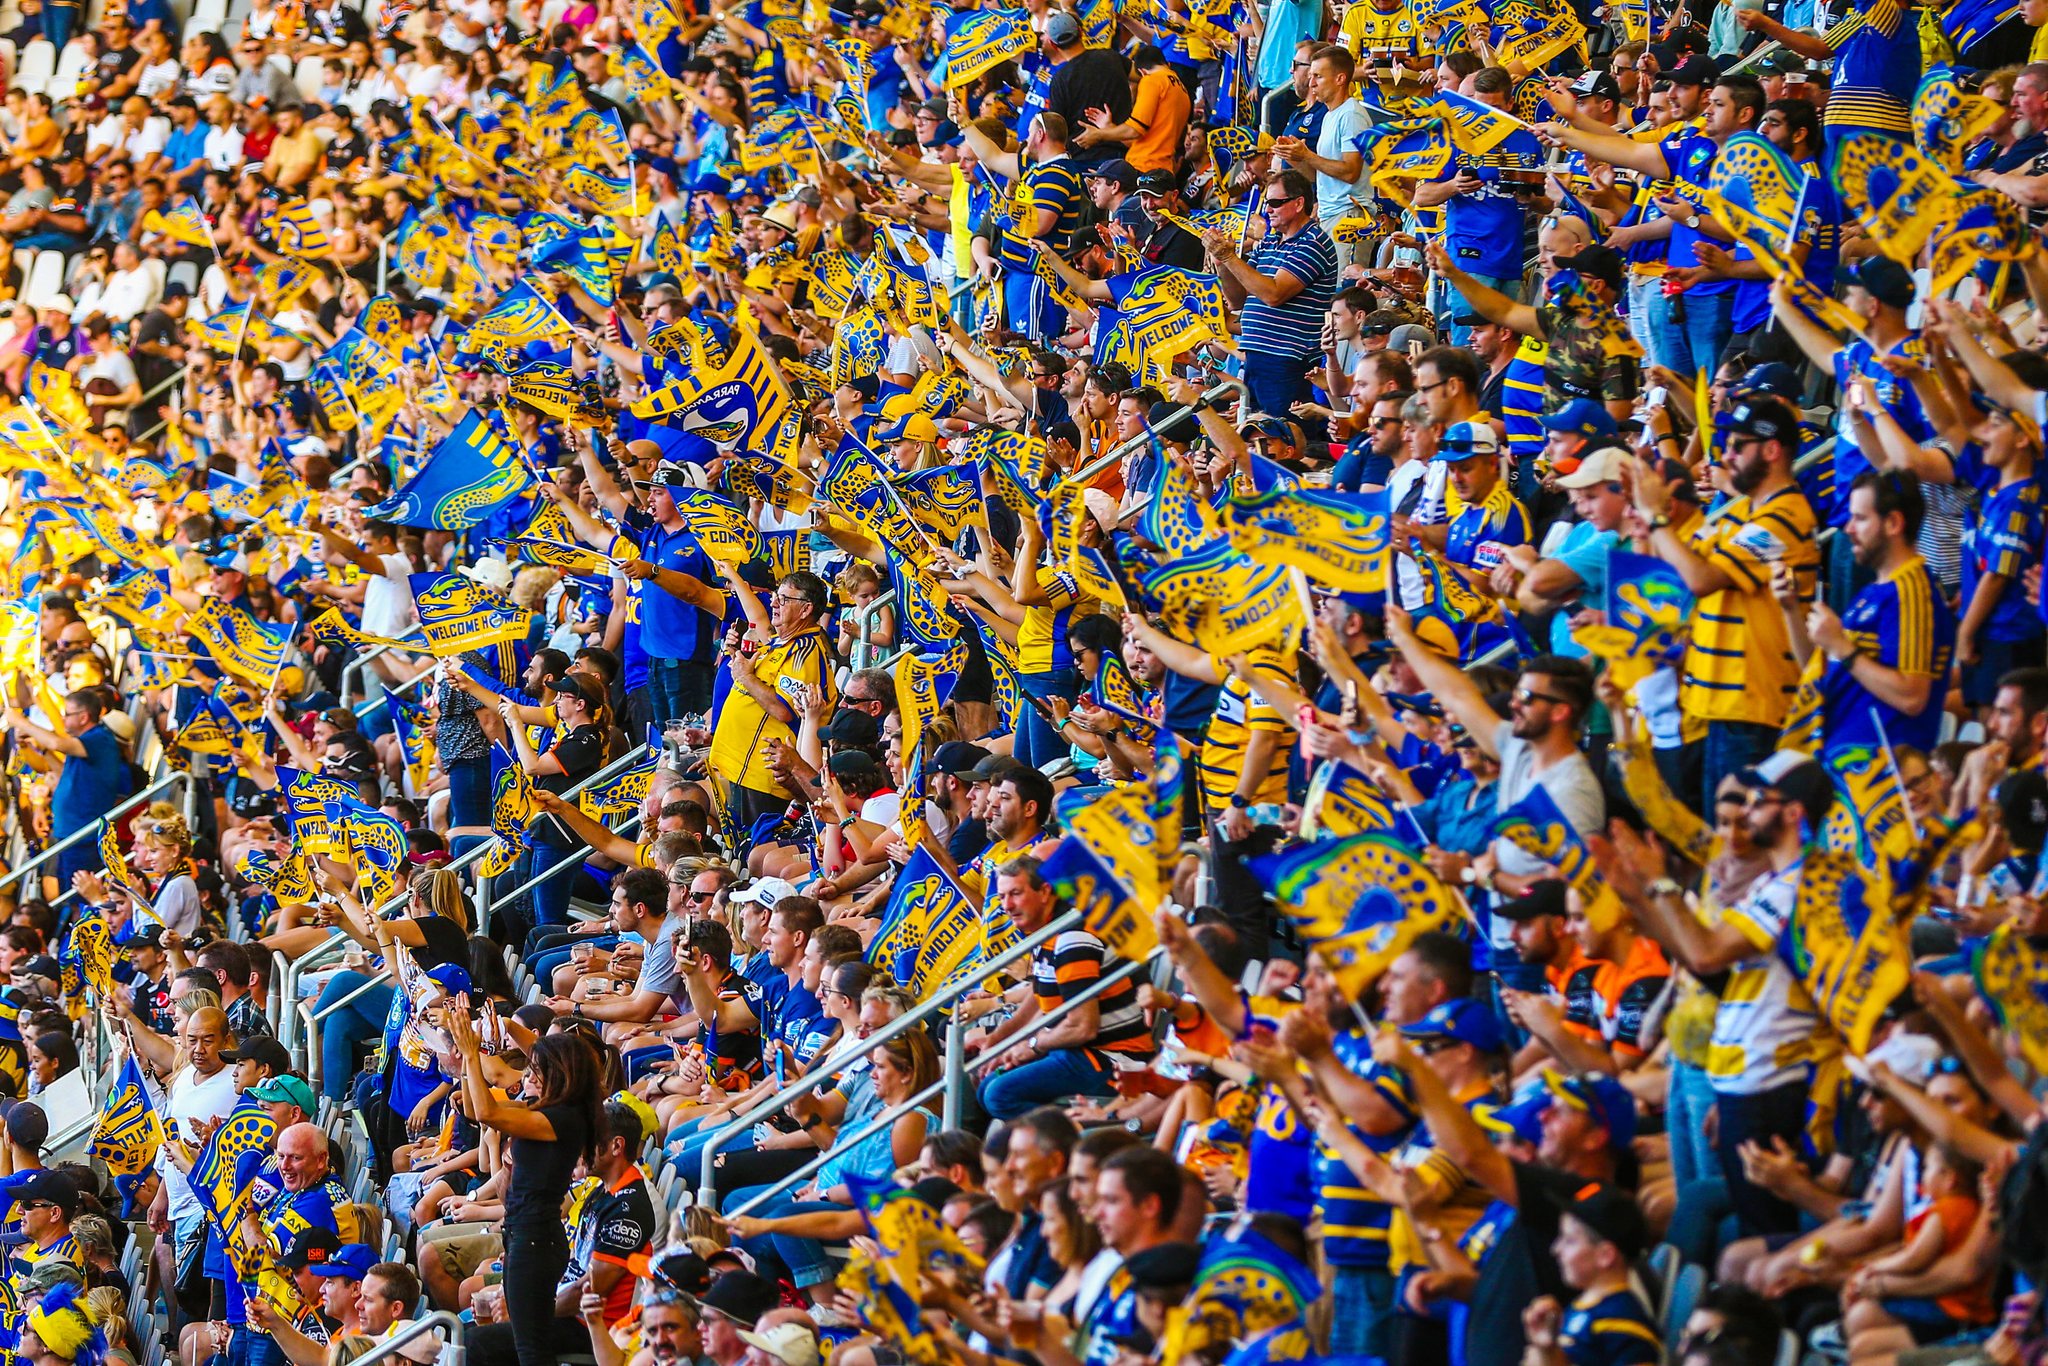 Parra Eels Grand Final Live Site CONFIRMED for Commbank Stadium this Sunday 